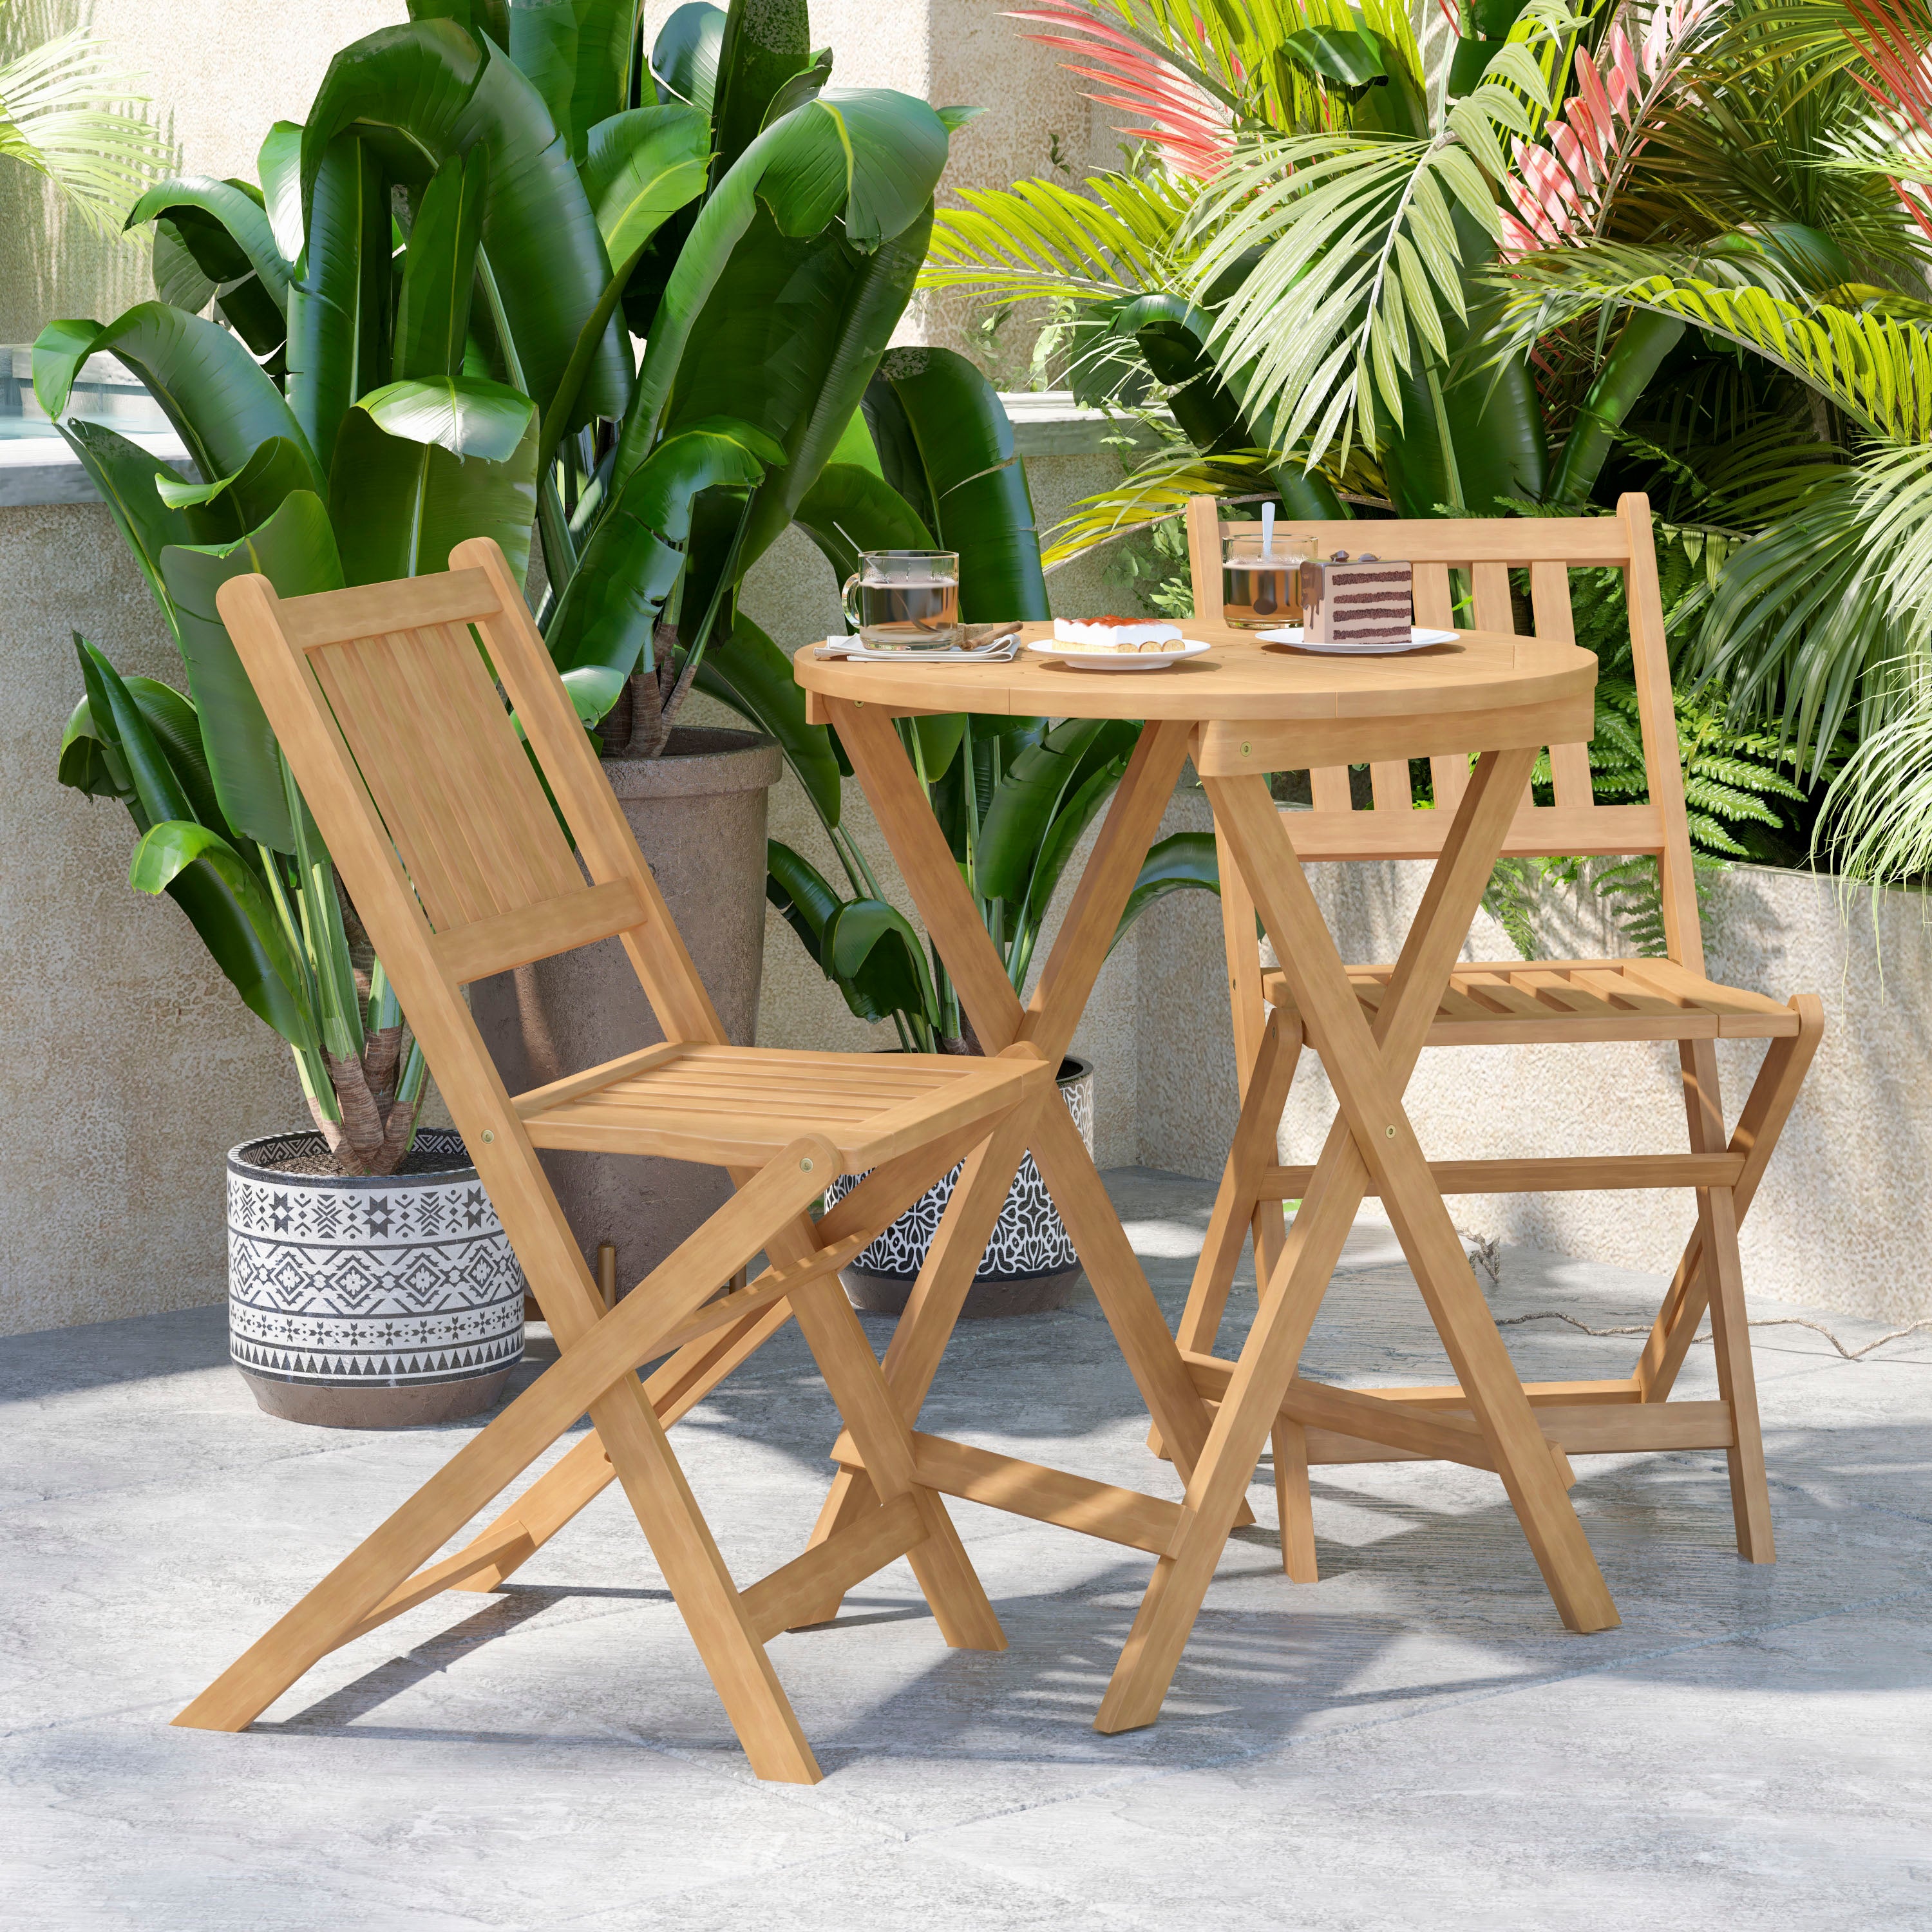 Martindale 3 Piece Folding Patio Bistro Set, Indoor/Outdoor Acacia Wood Table and 2 Chair Set with Slatted Design-Folding Table and Chair Set-Flash Furniture-Wall2Wall Furnishings